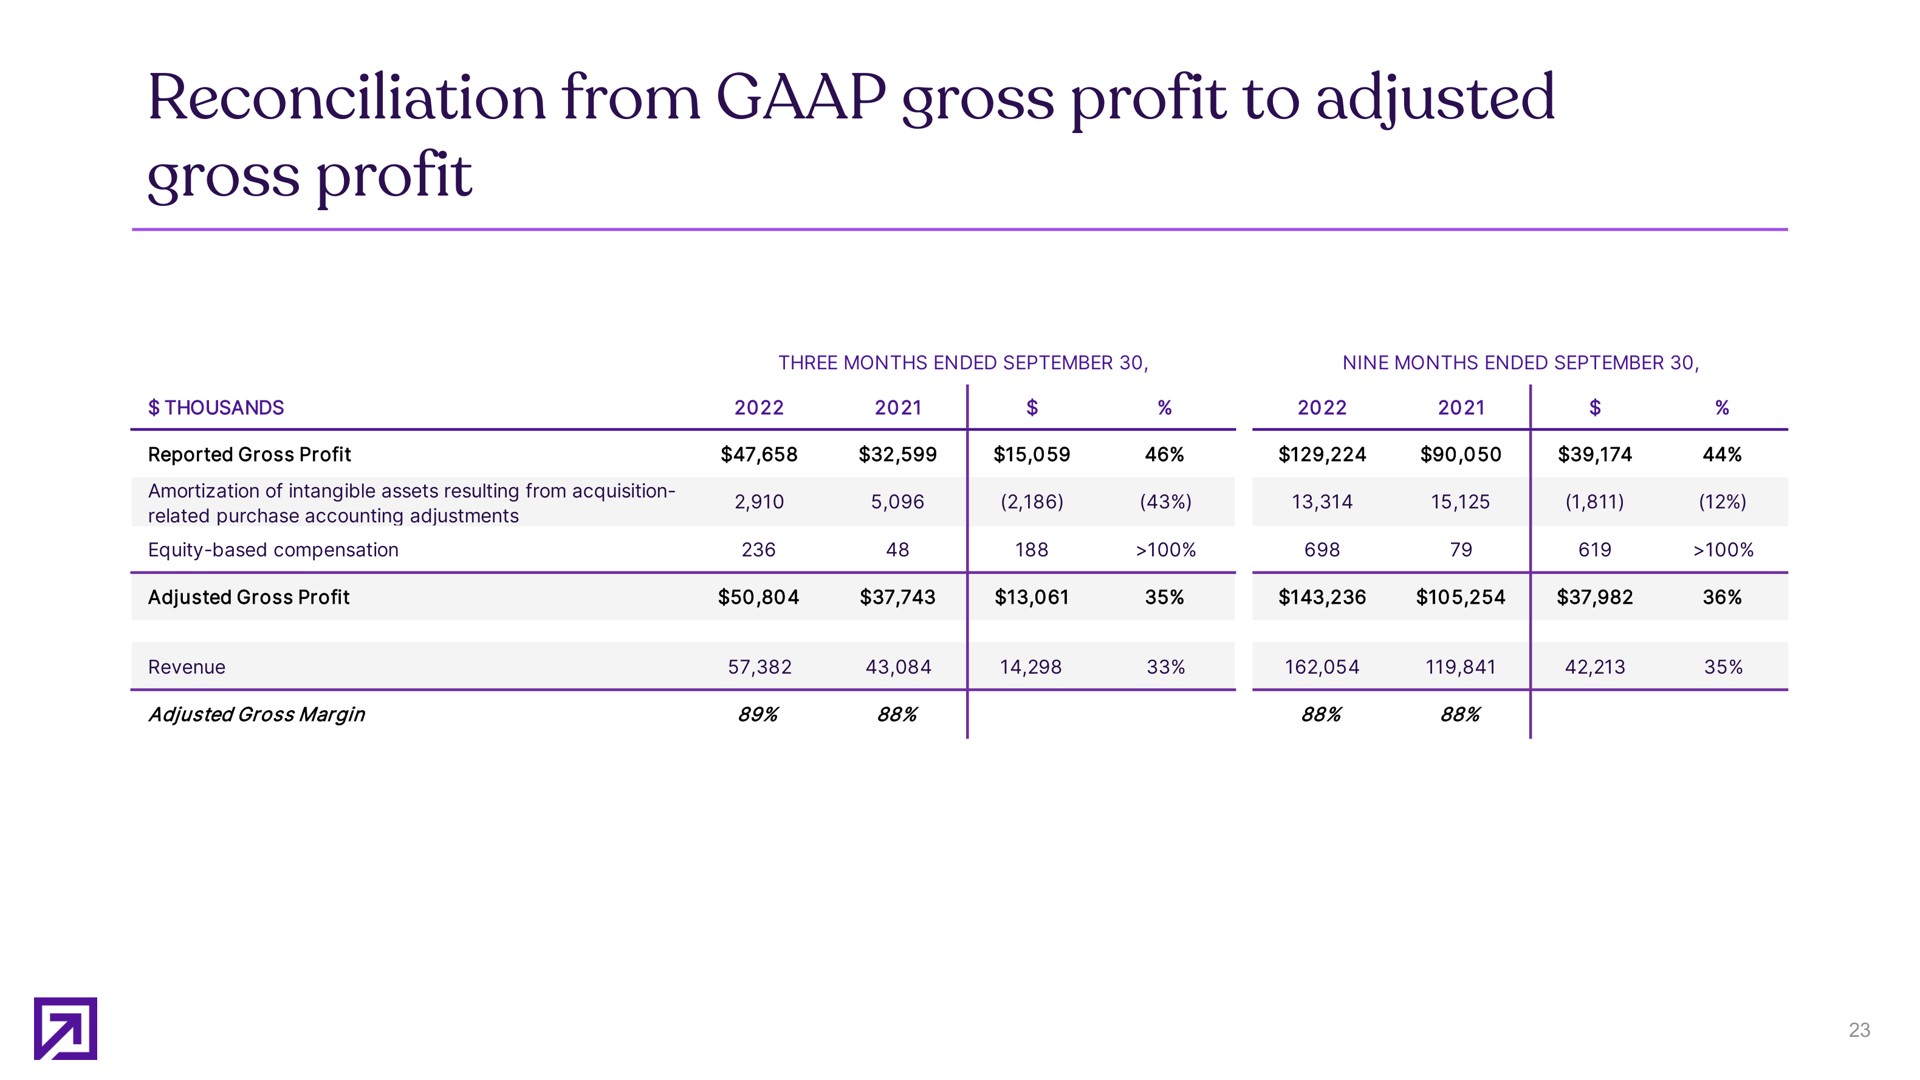 reconciliation from gross profit to adjusted gross profit | Definitive Healthcare